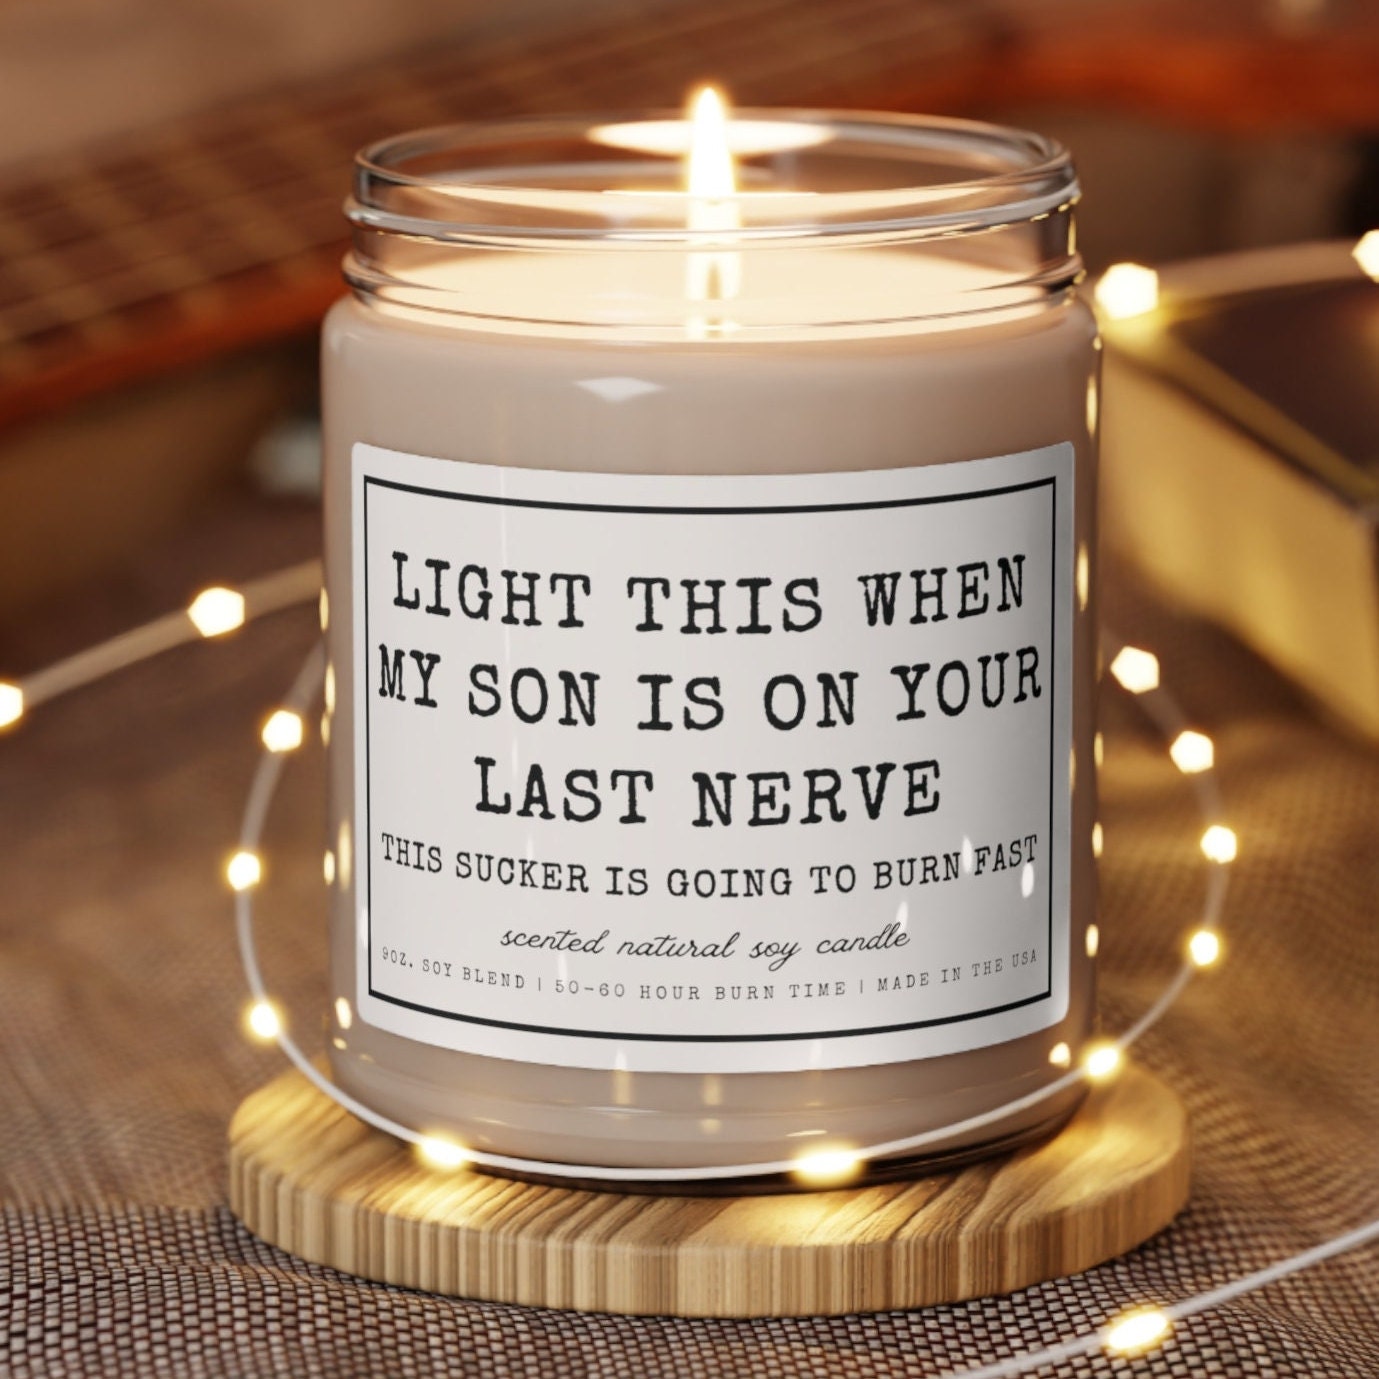 Funny Gift for First Time Parents - 'Good Till' Scented Candle for New Moms  - Unique After Birth Presents for Mom Dad ; Humorous Postpartum Gag Gifts